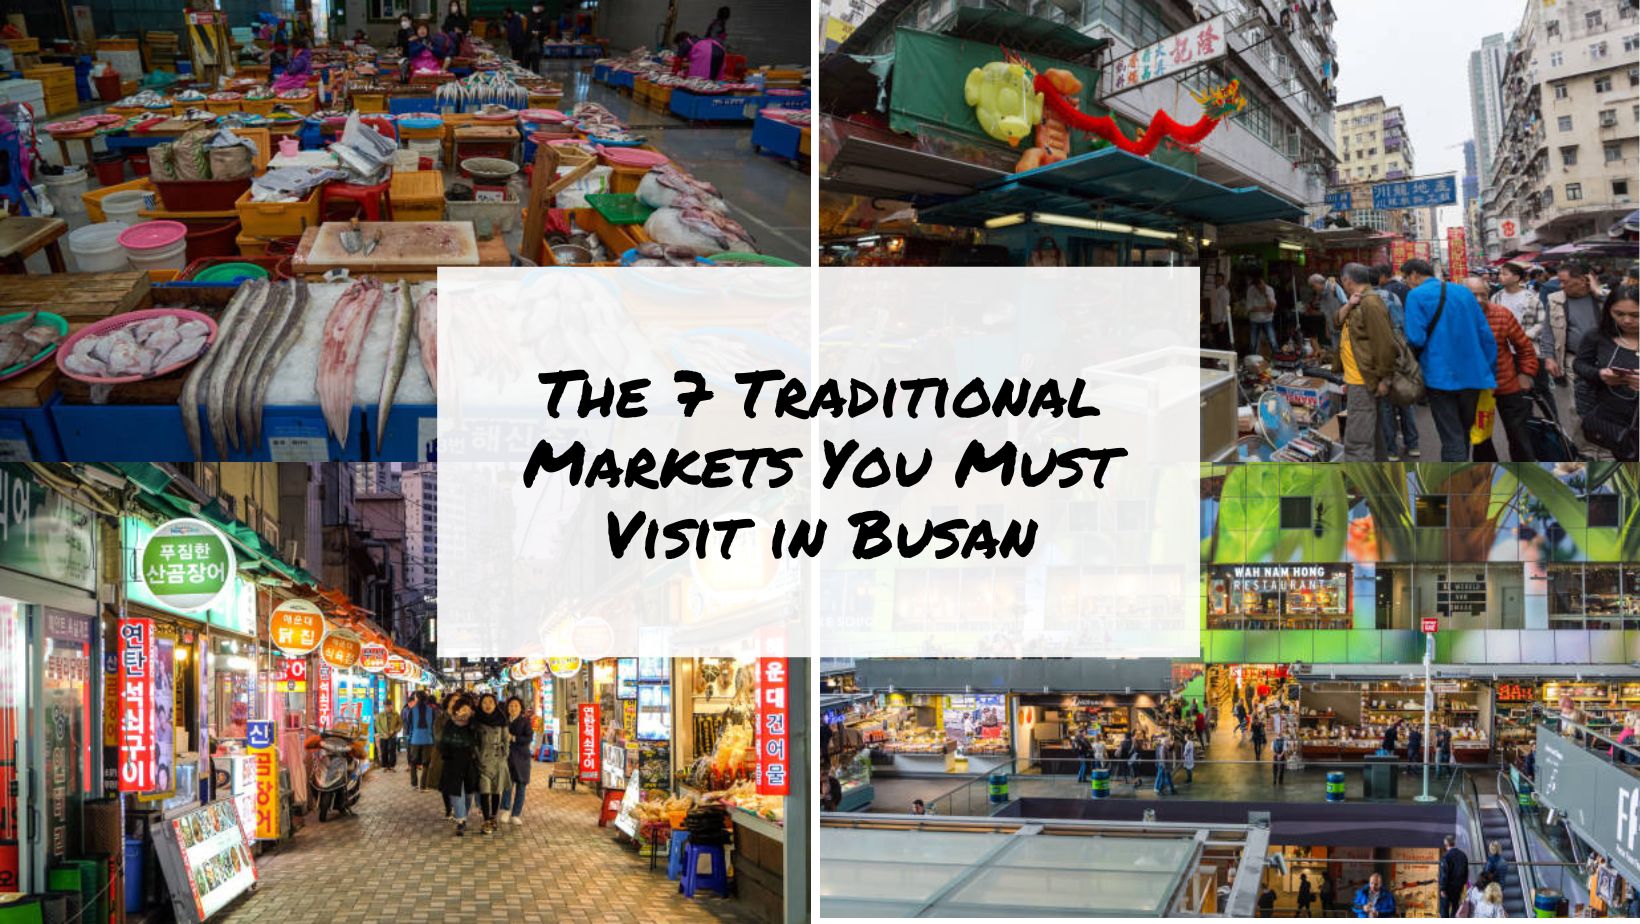 The 7 Traditional Markets You Must Visit in Busan